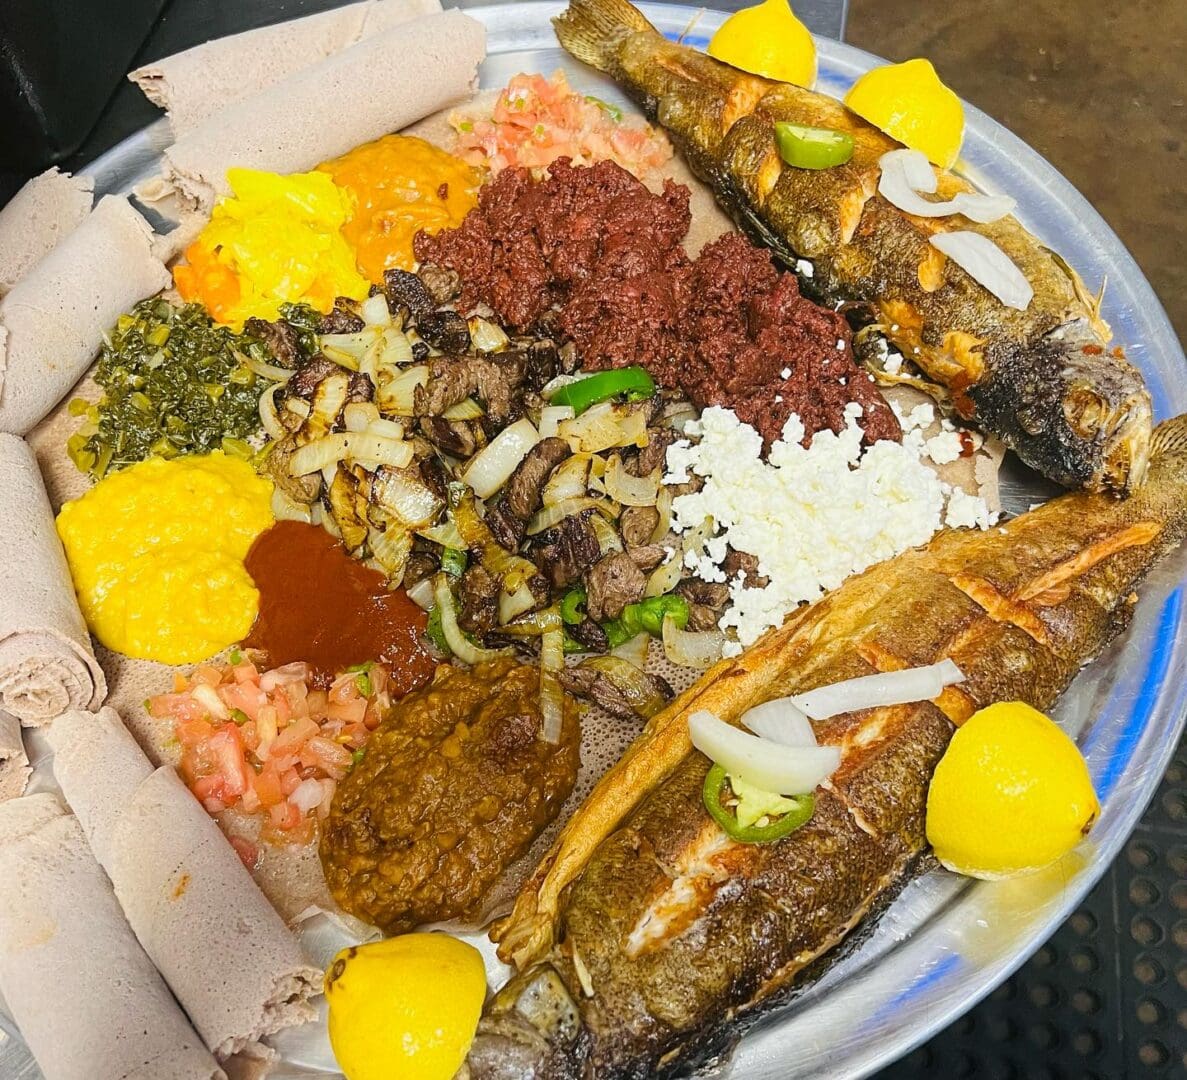 A plate of food with many different types of meat.